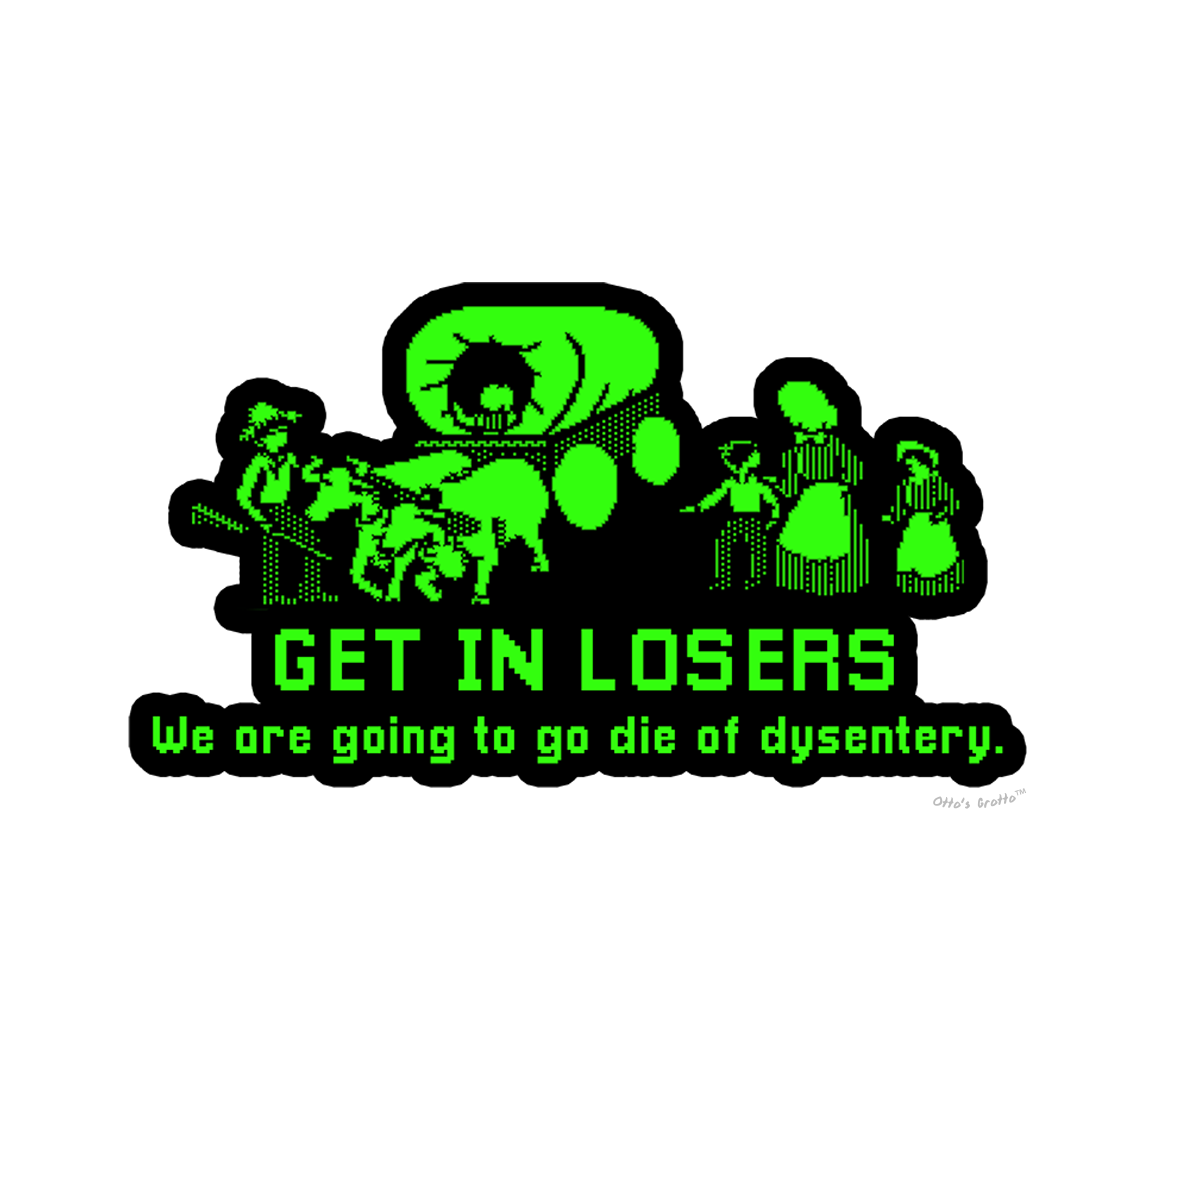 Oregon Trail - Get In Losers Sticker Eighties Sticker 1980s Sticker Retro Gaming Sticker Funny Decal for Eighties Kids